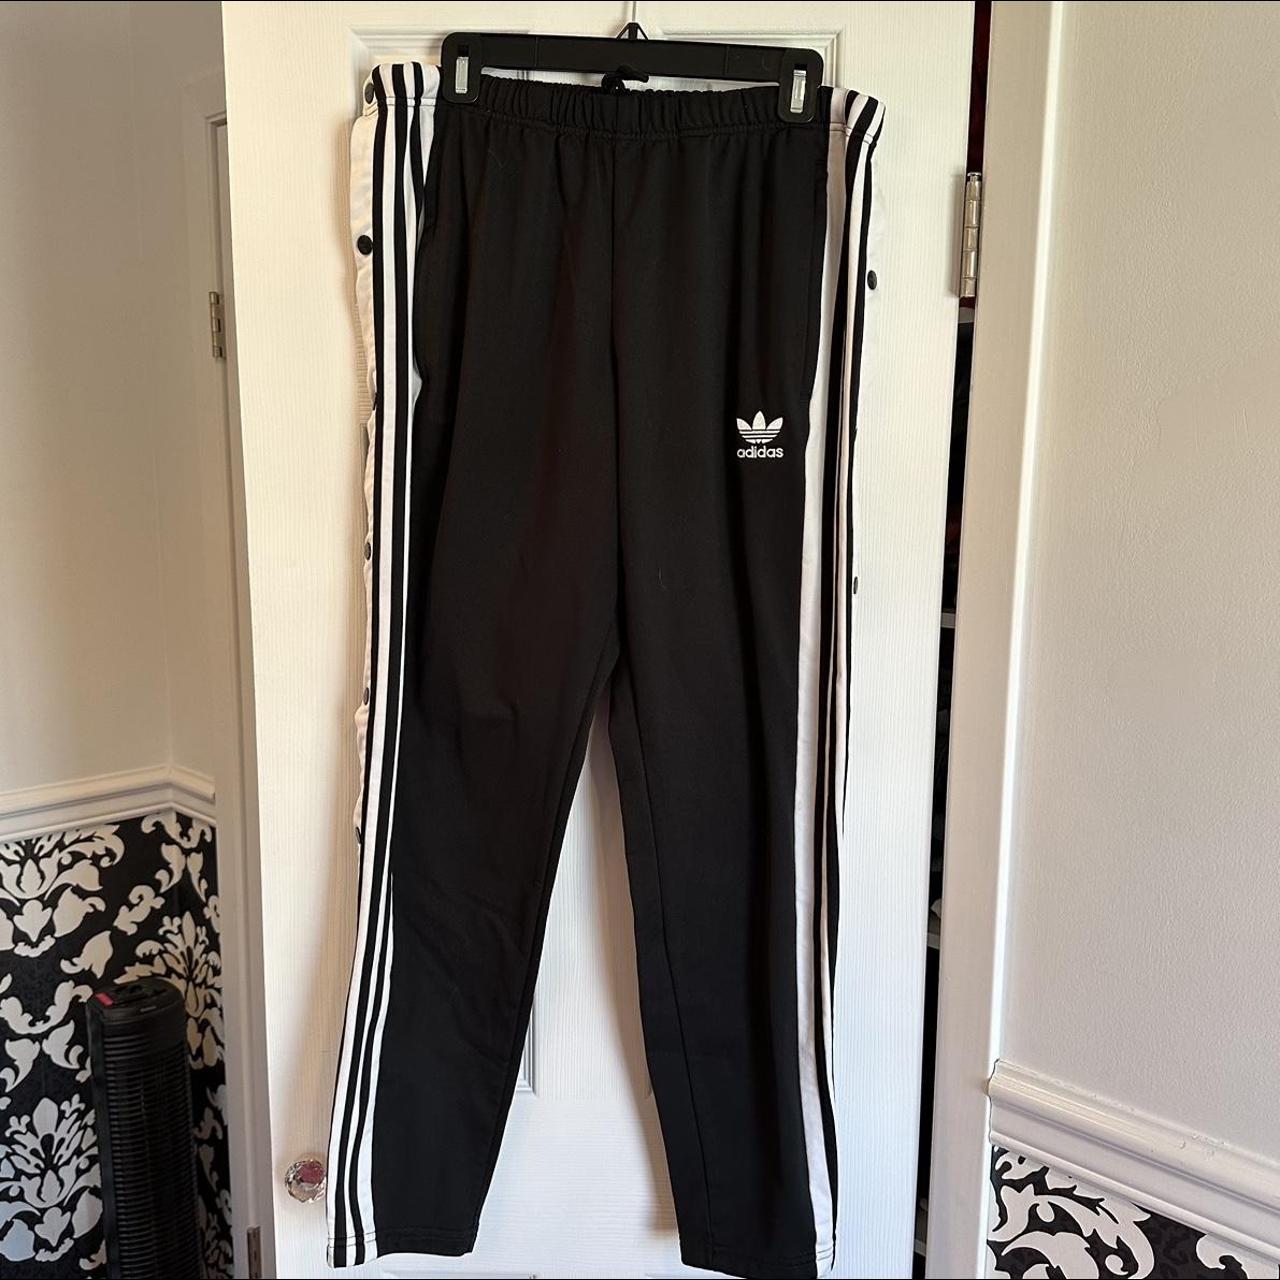 Adidas Women's Black and White Trousers